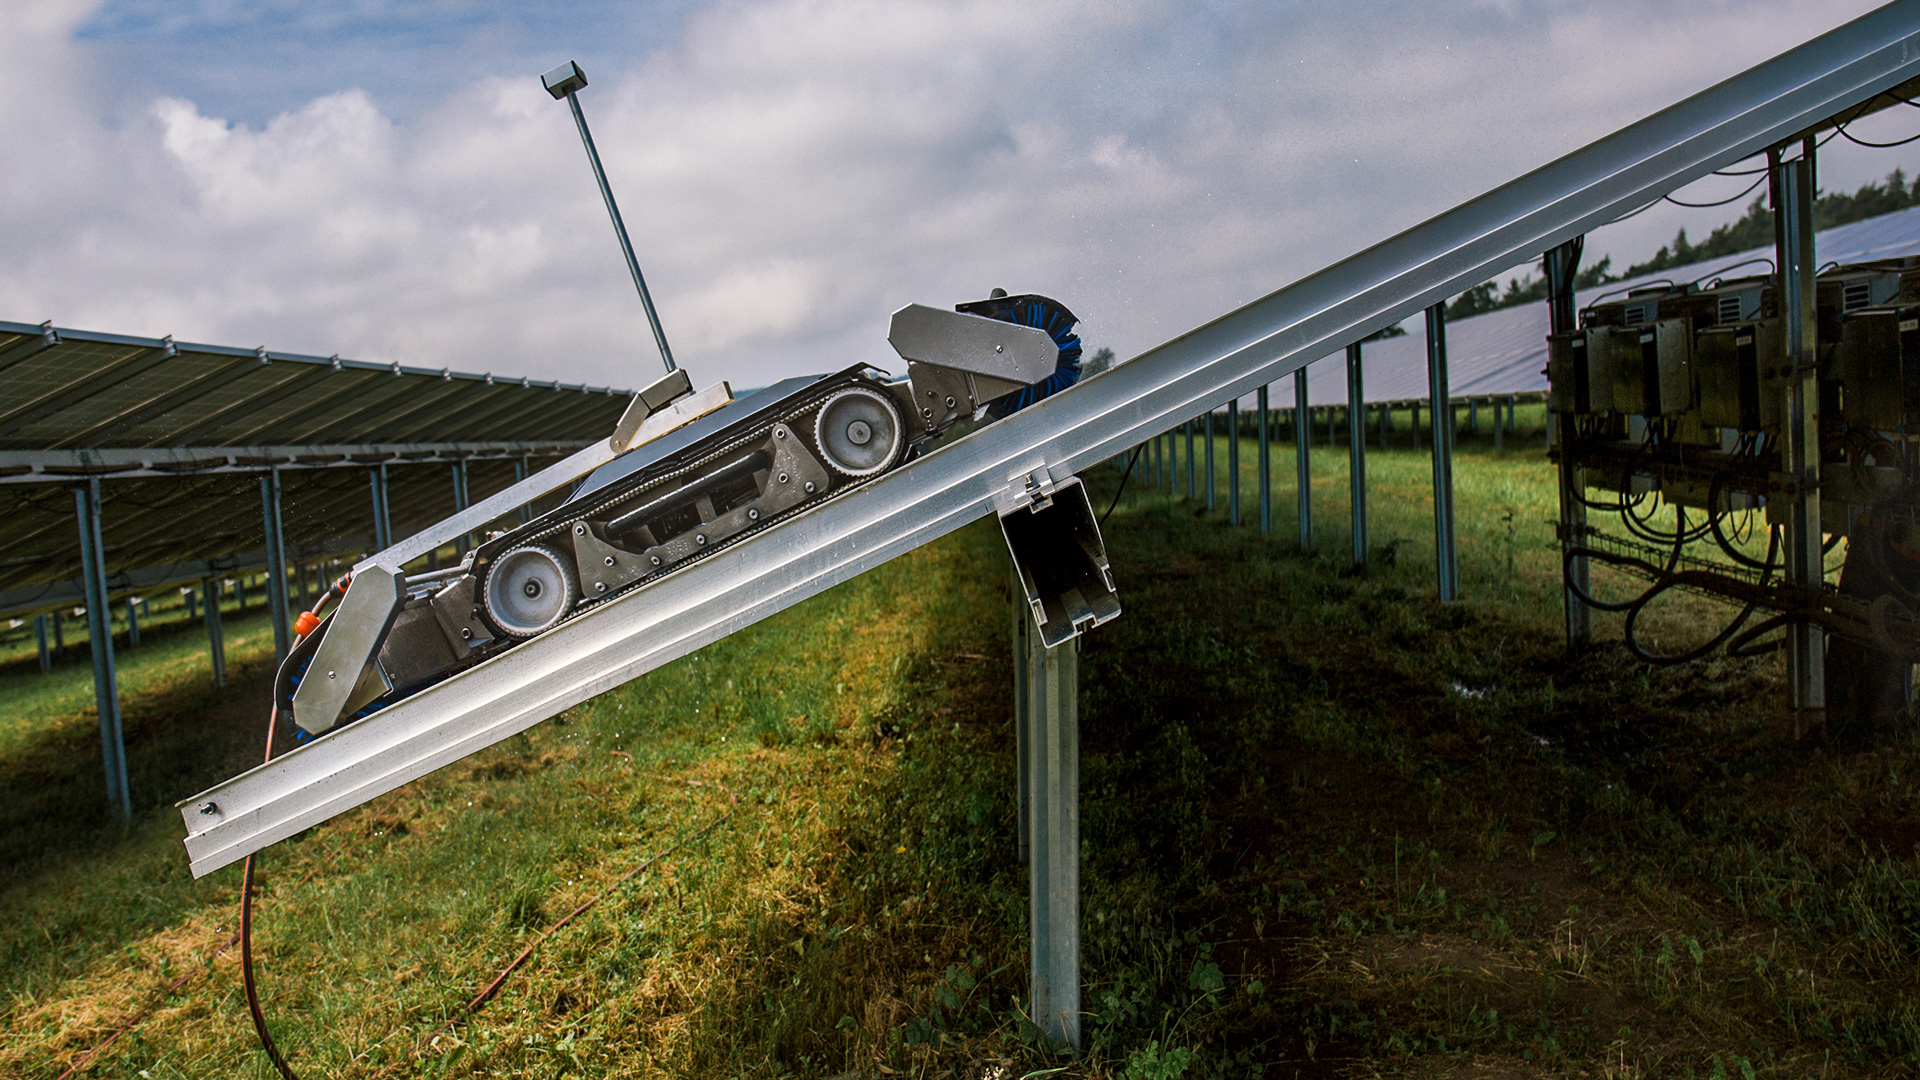 Robot cleaning solar installations with 25° panel inclinations